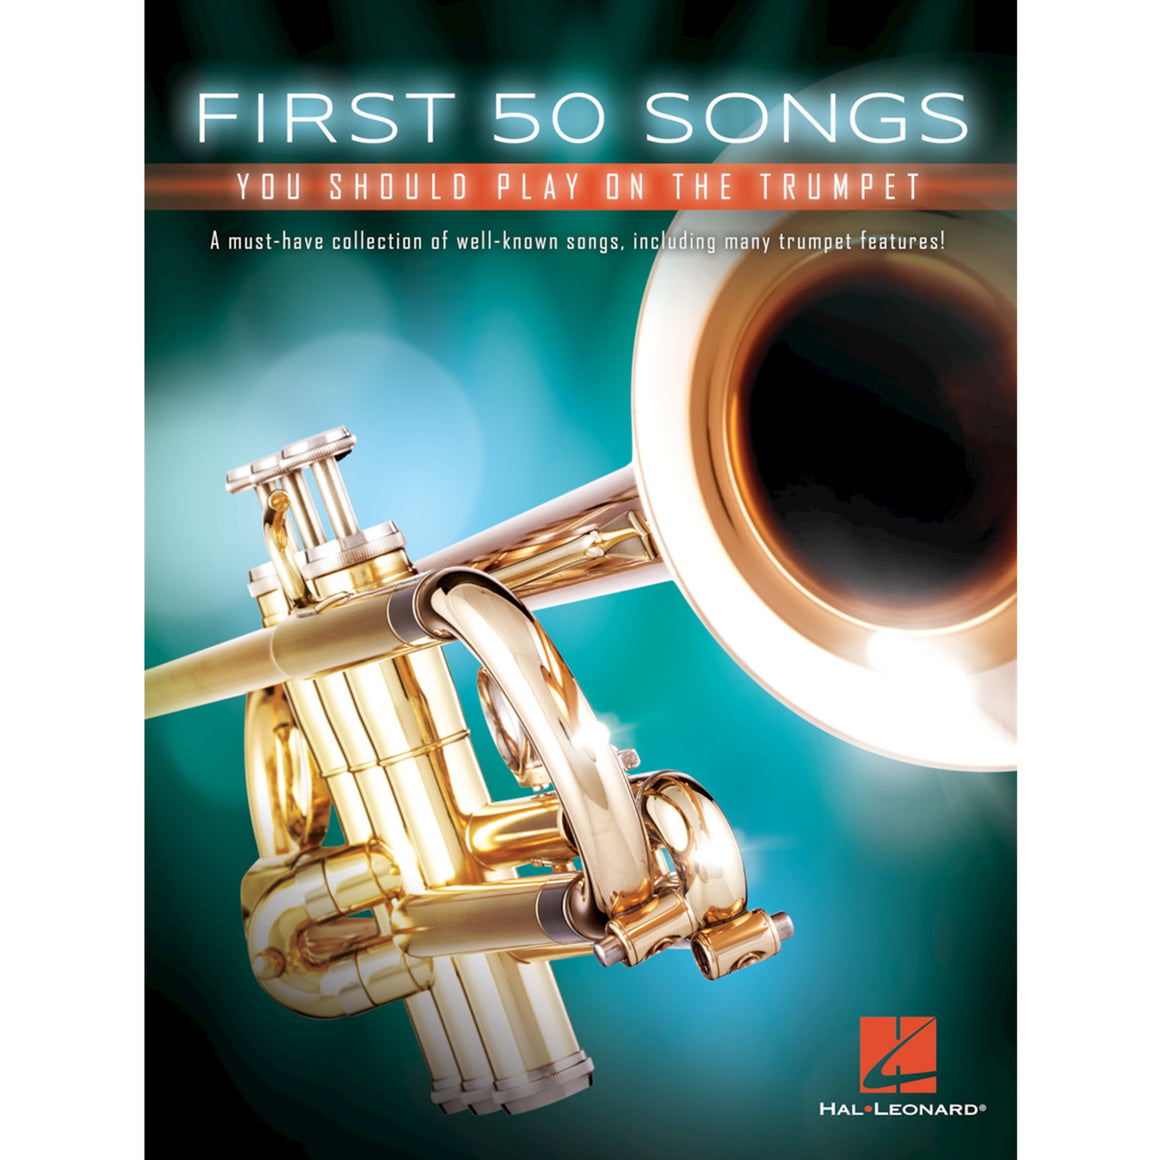 HAL LEONARD 248846 First 50 Songs You Should Play on the Trumpet